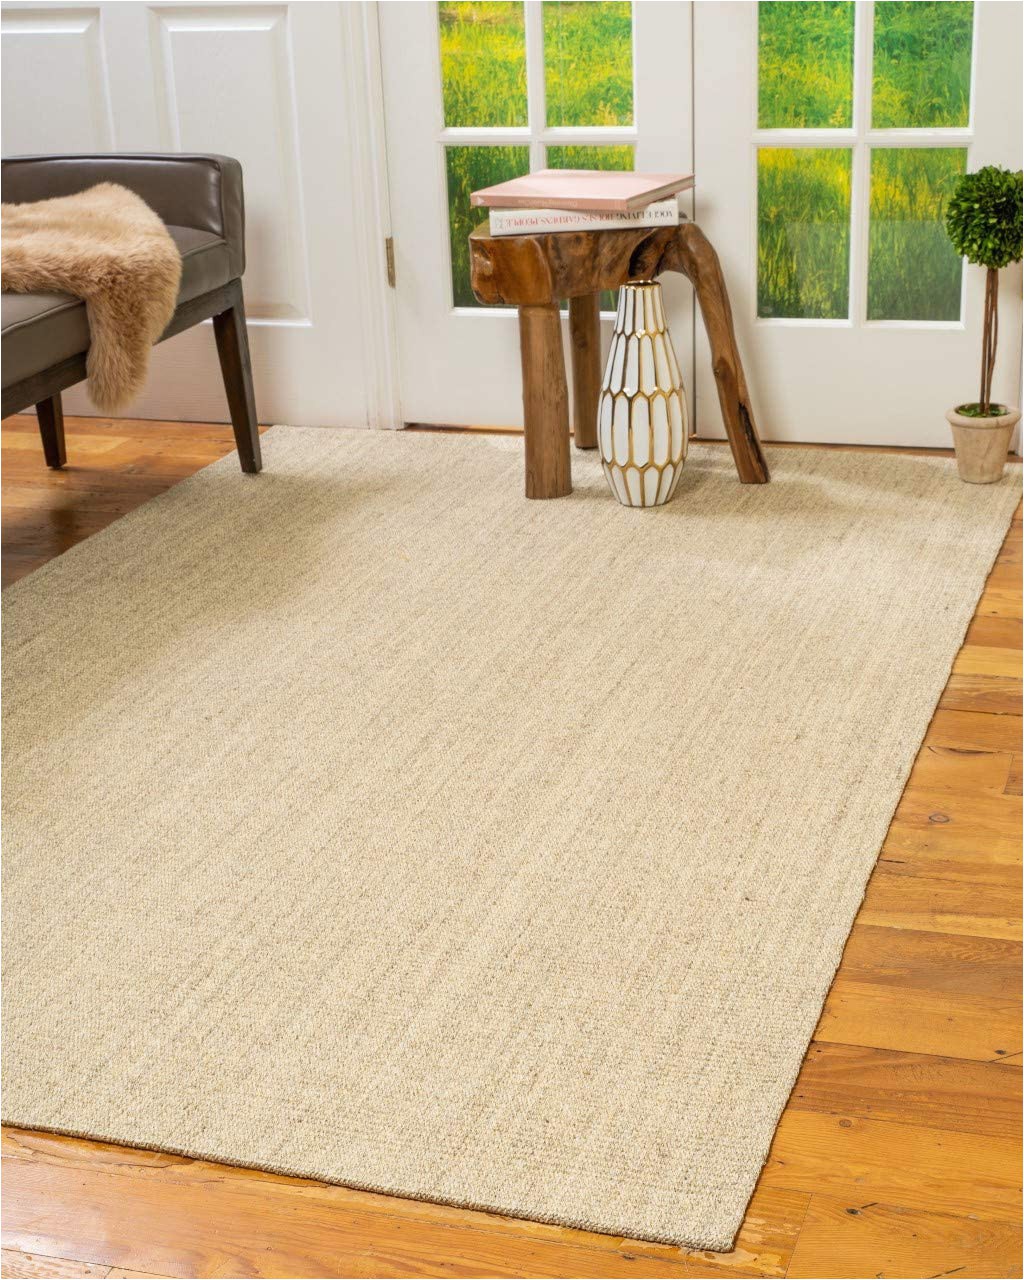 Area Rugs for Wood Laminate Natural area Rugs Natural Fiber Stanford Beige Sisal Rug 5 X 8